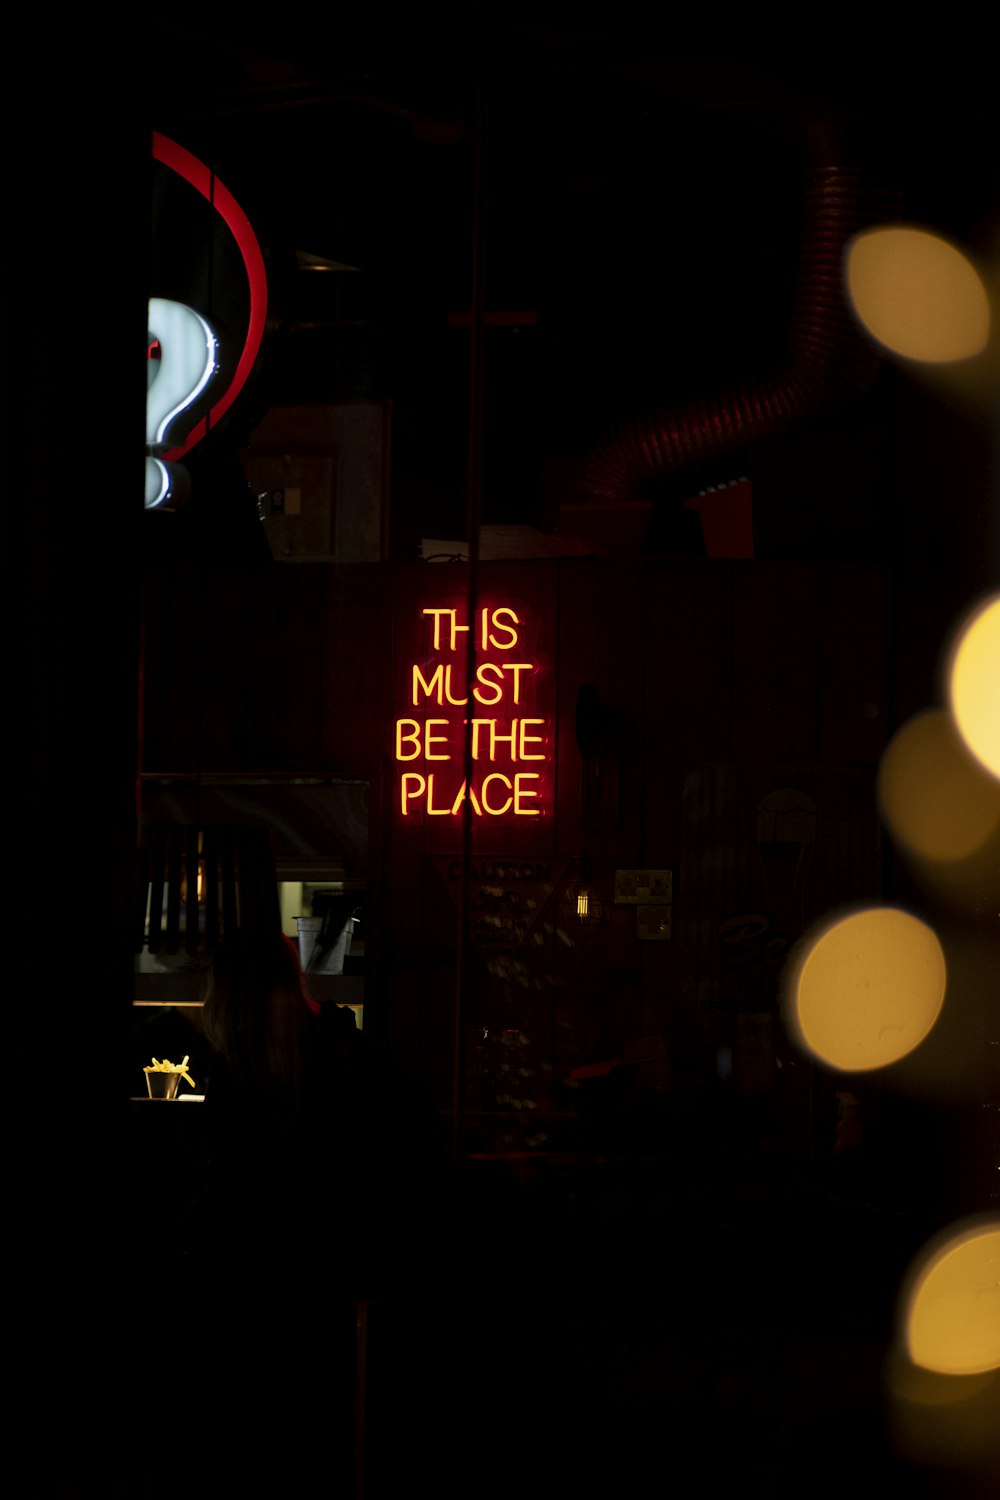 a neon sign that says it is must be the place